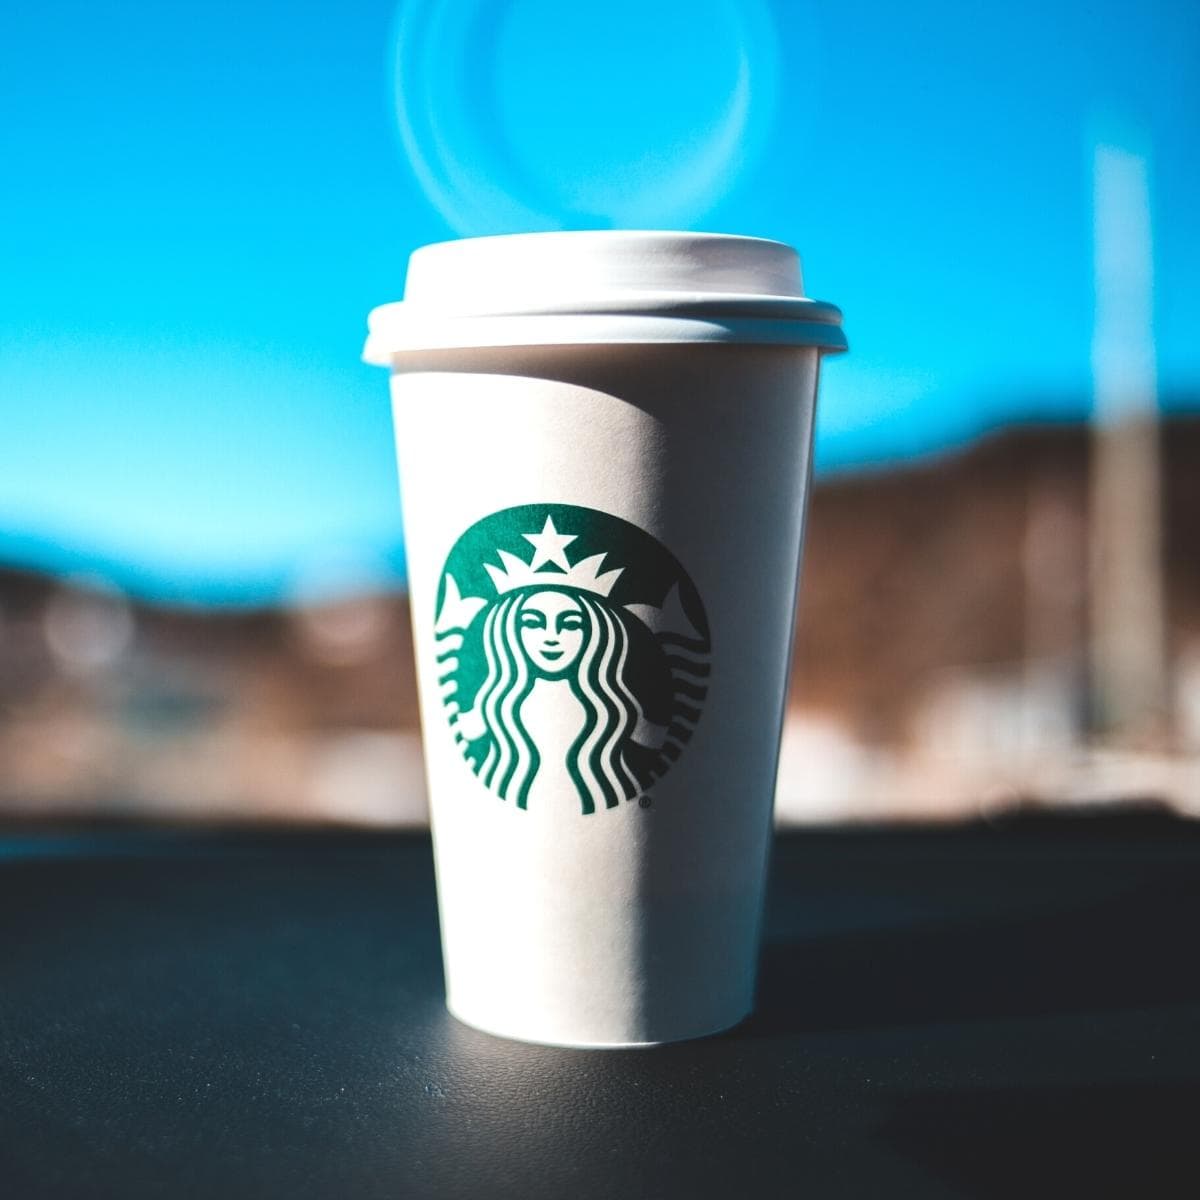 A white and green Starbucks cup resting on the dashboard of a car with a blue sky behind it.